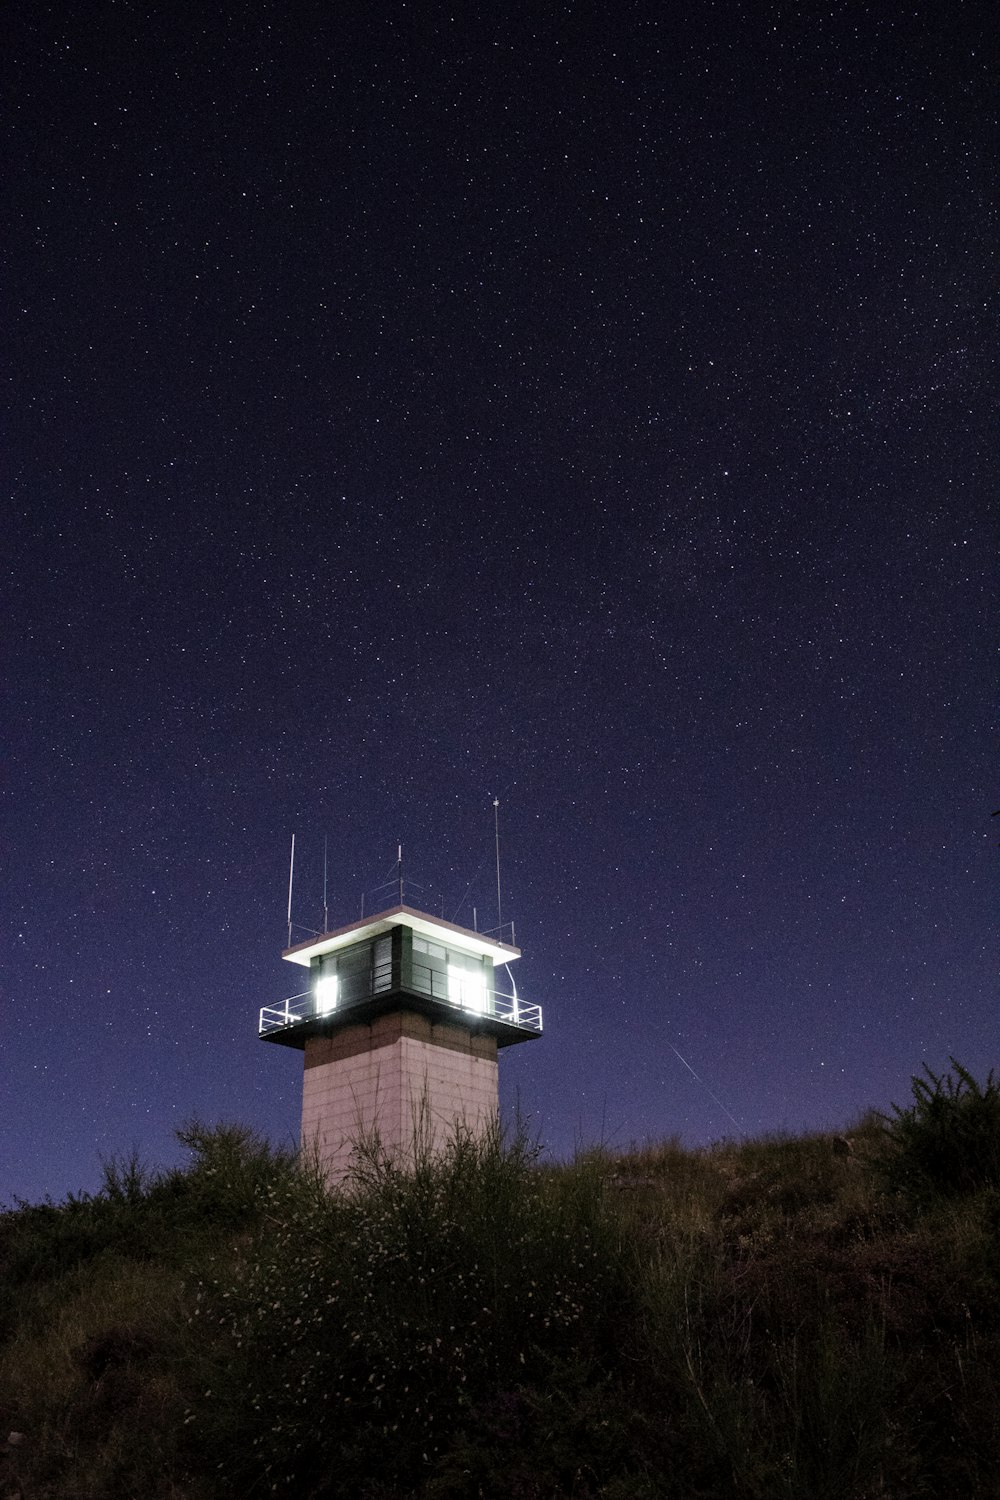 lighted guard house on mountain's peak during night time